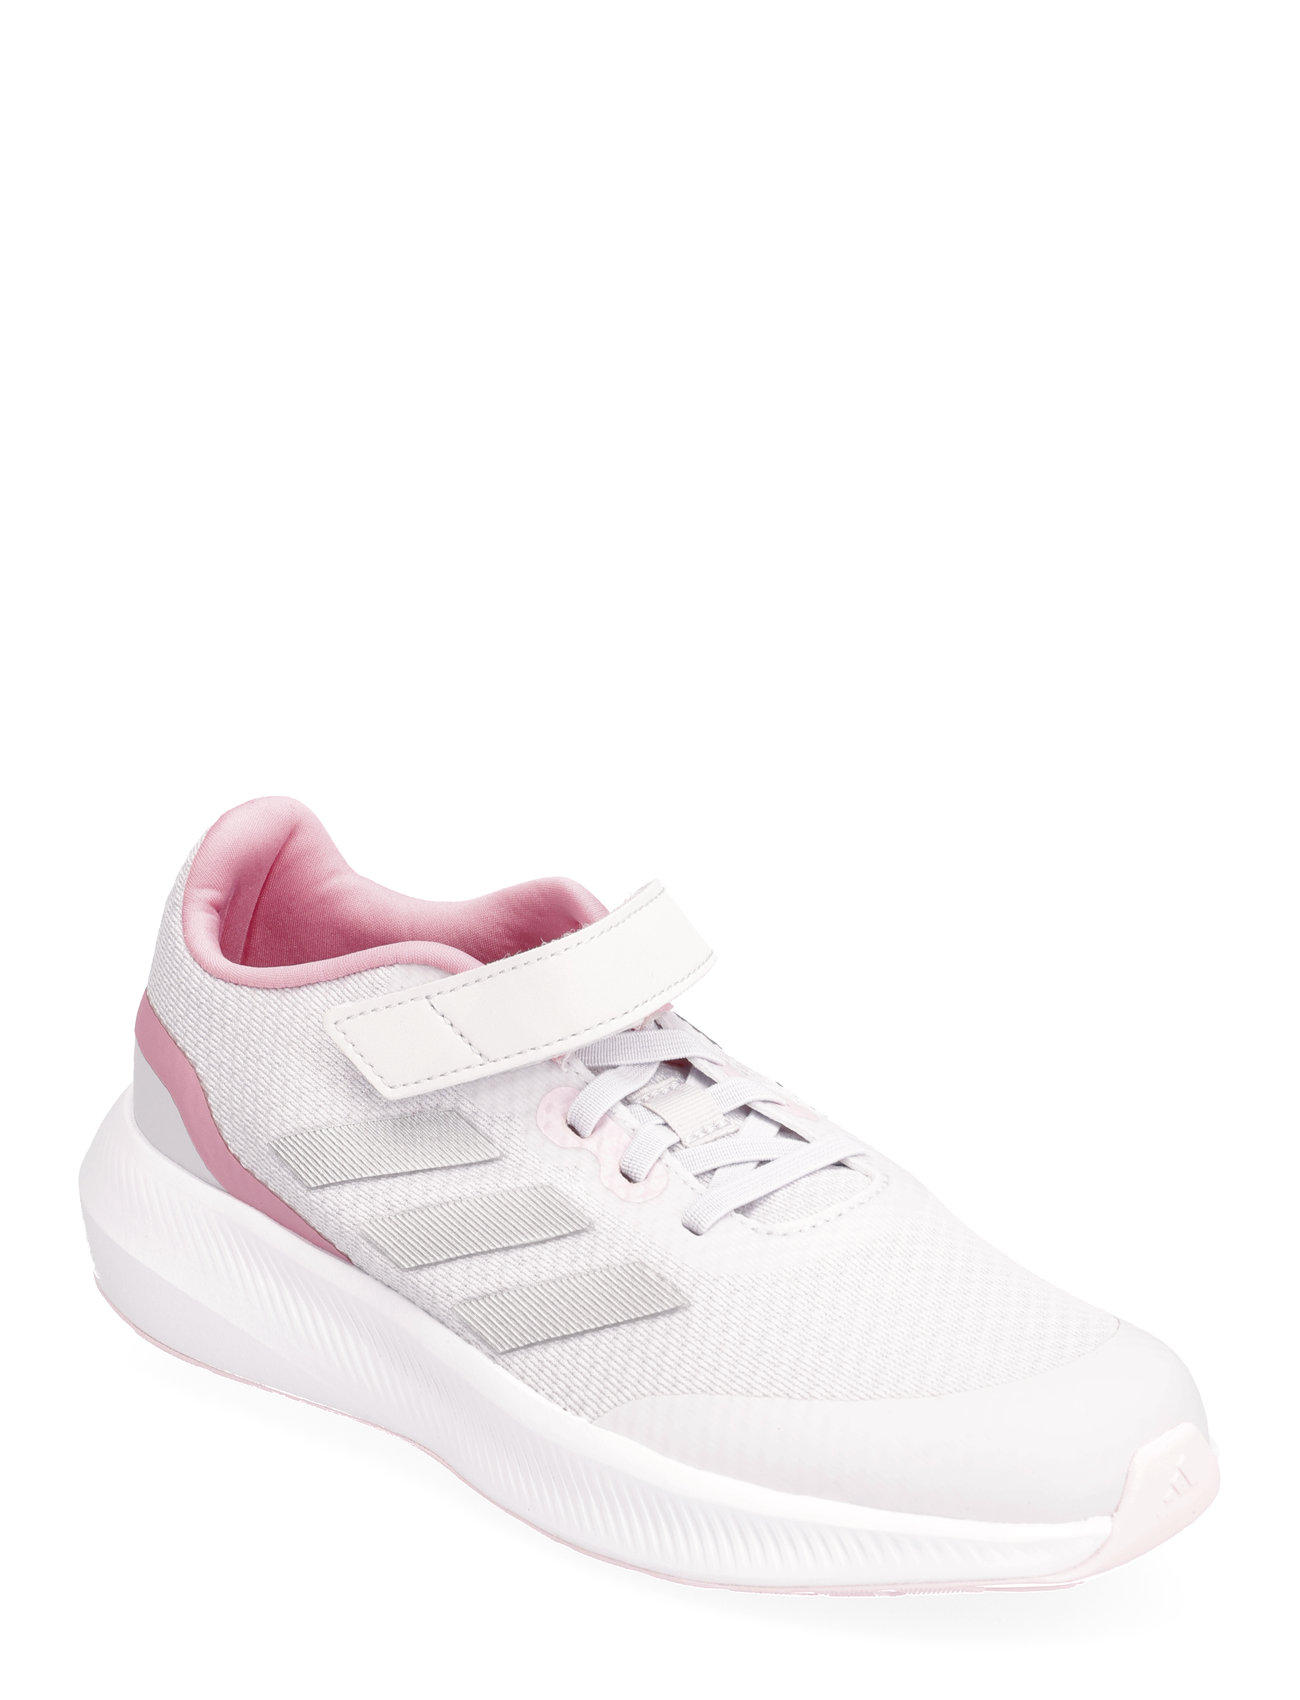 adidas Sportswear Runfalcon 3.0 Elastic Lace Top Strap Shoes - Sneakers | 